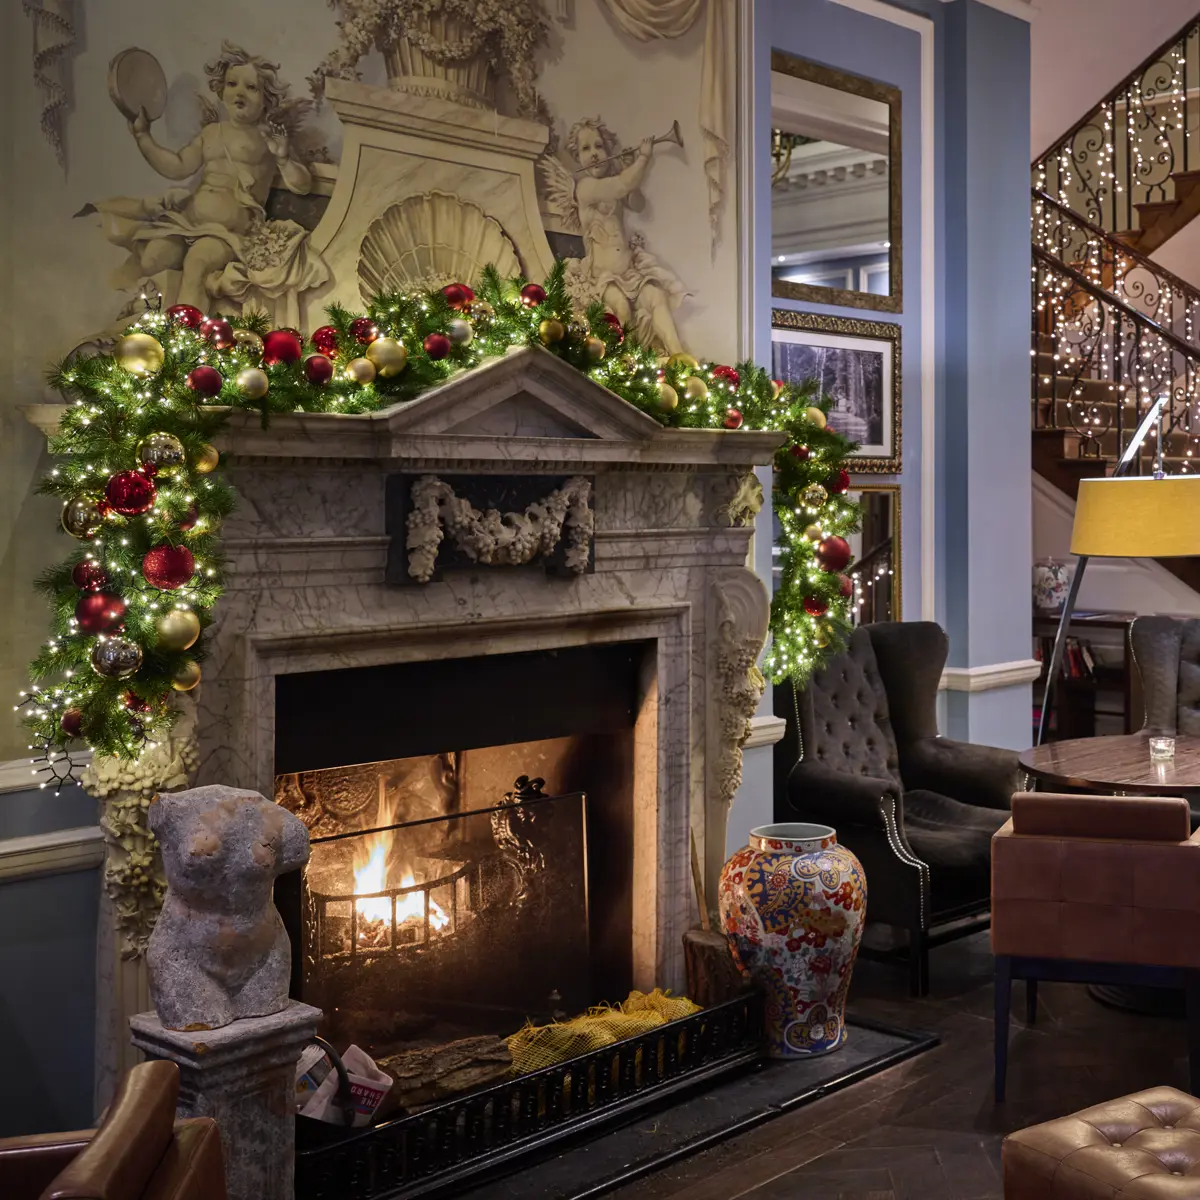 Festive ambience and decorations around a fireplace 